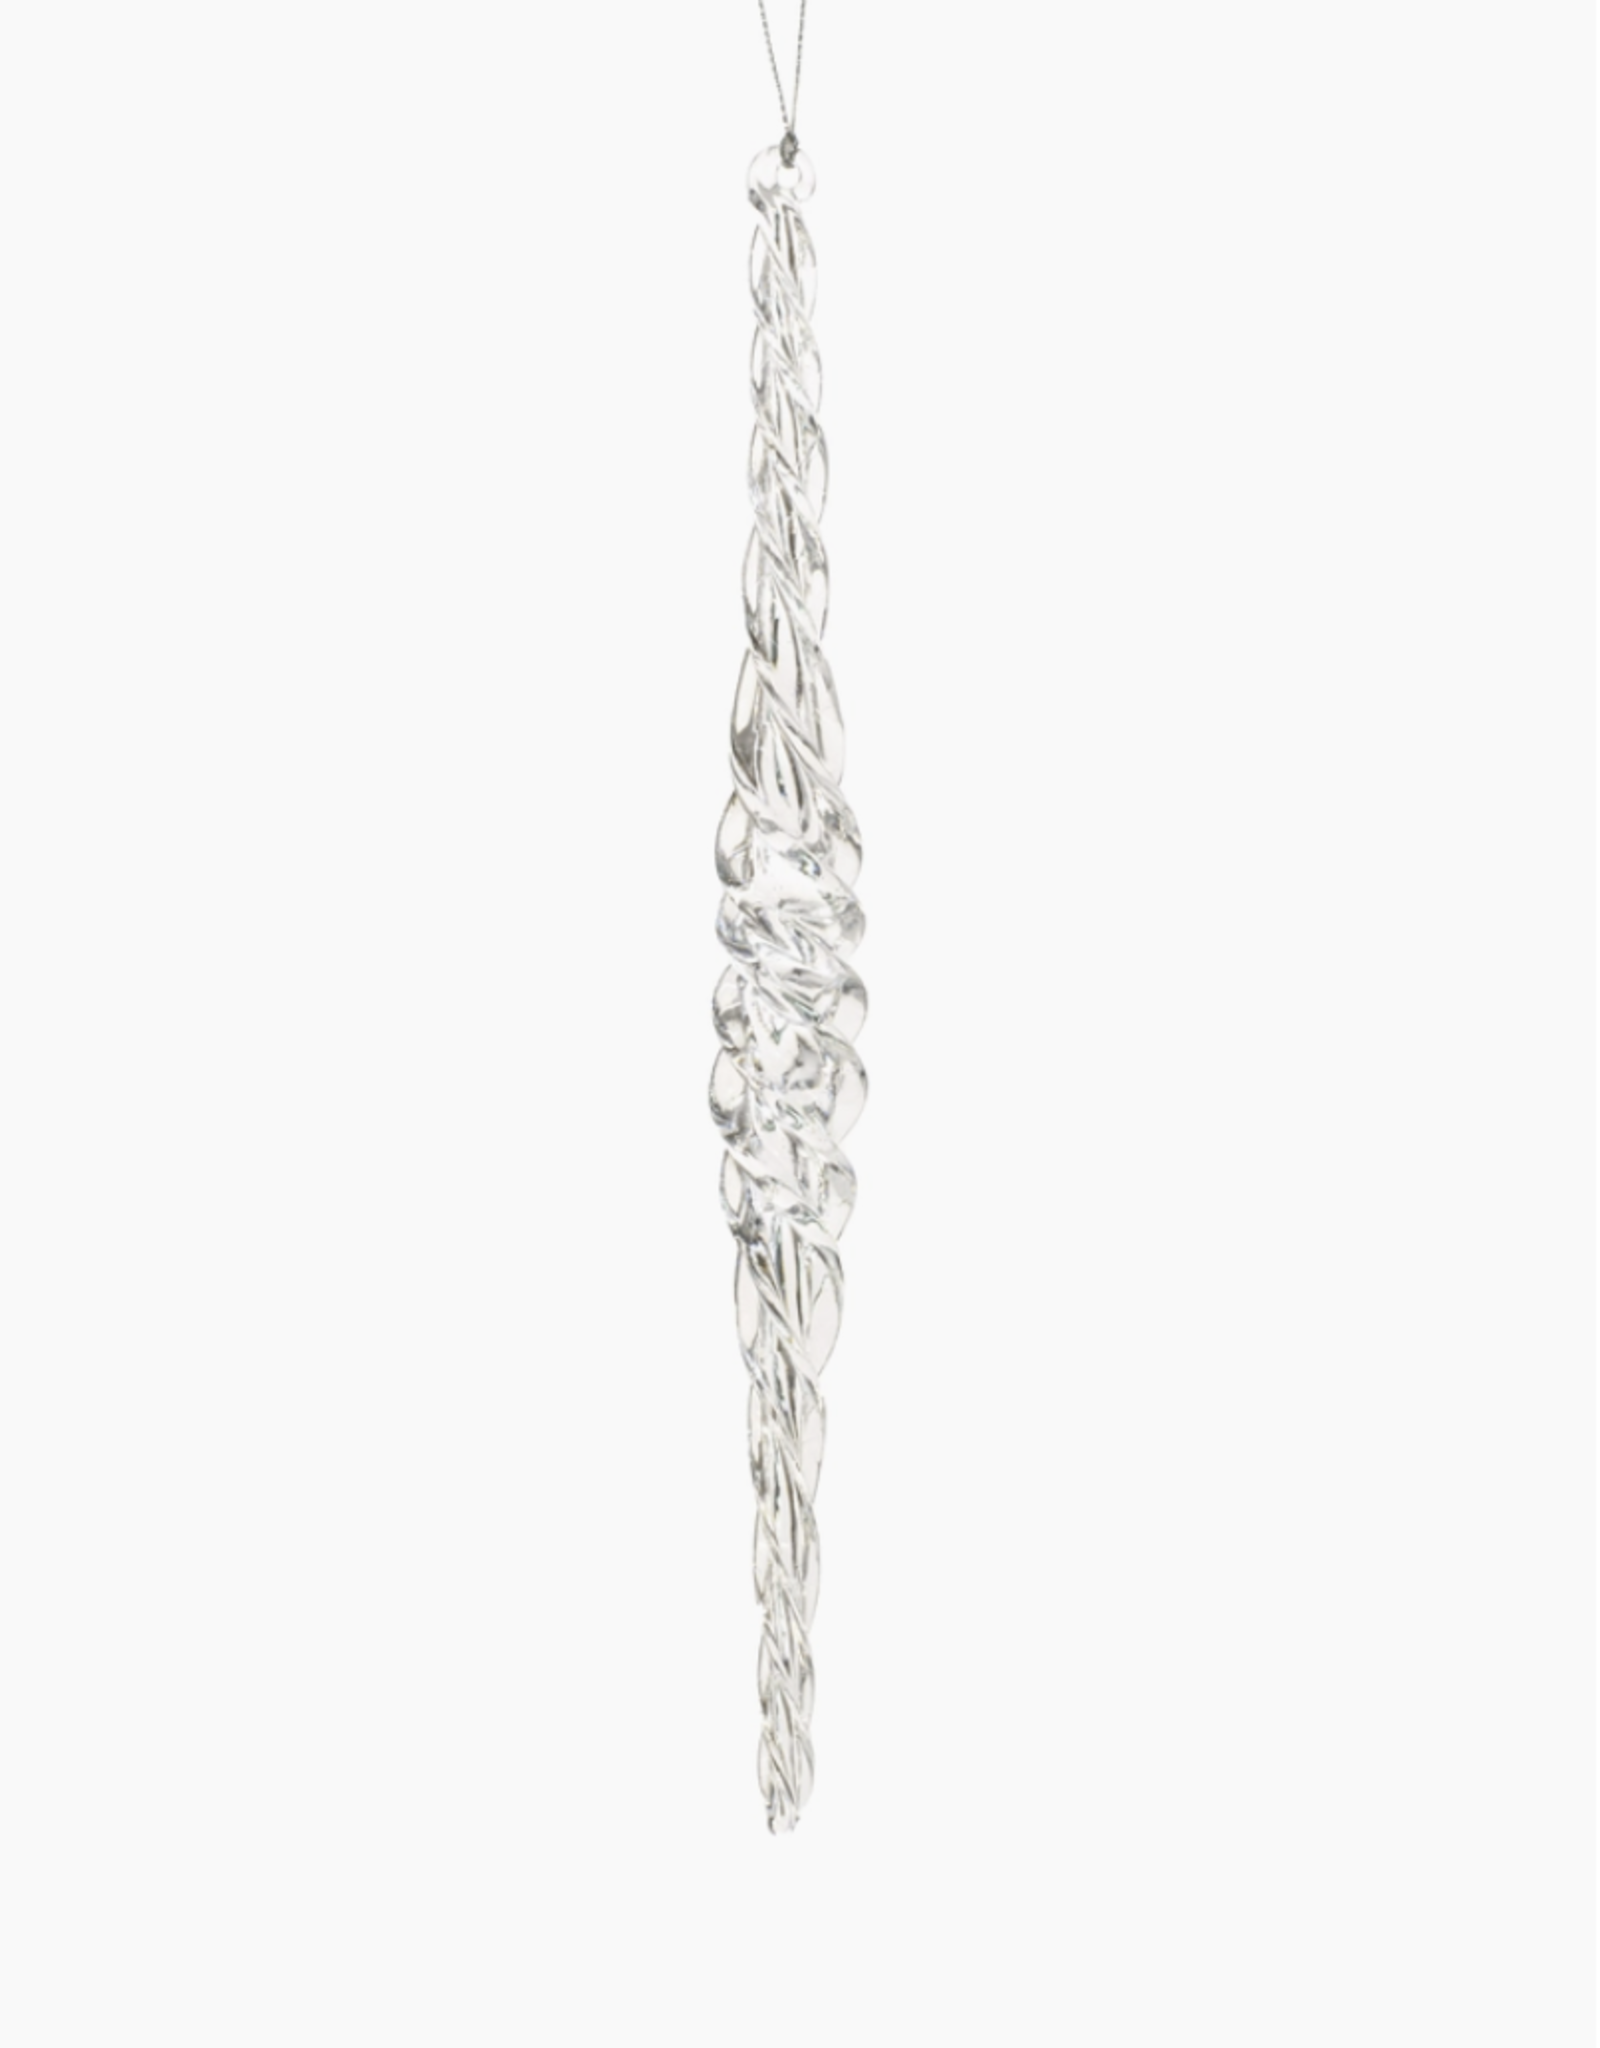 Clear Hanging Twisted Icicle